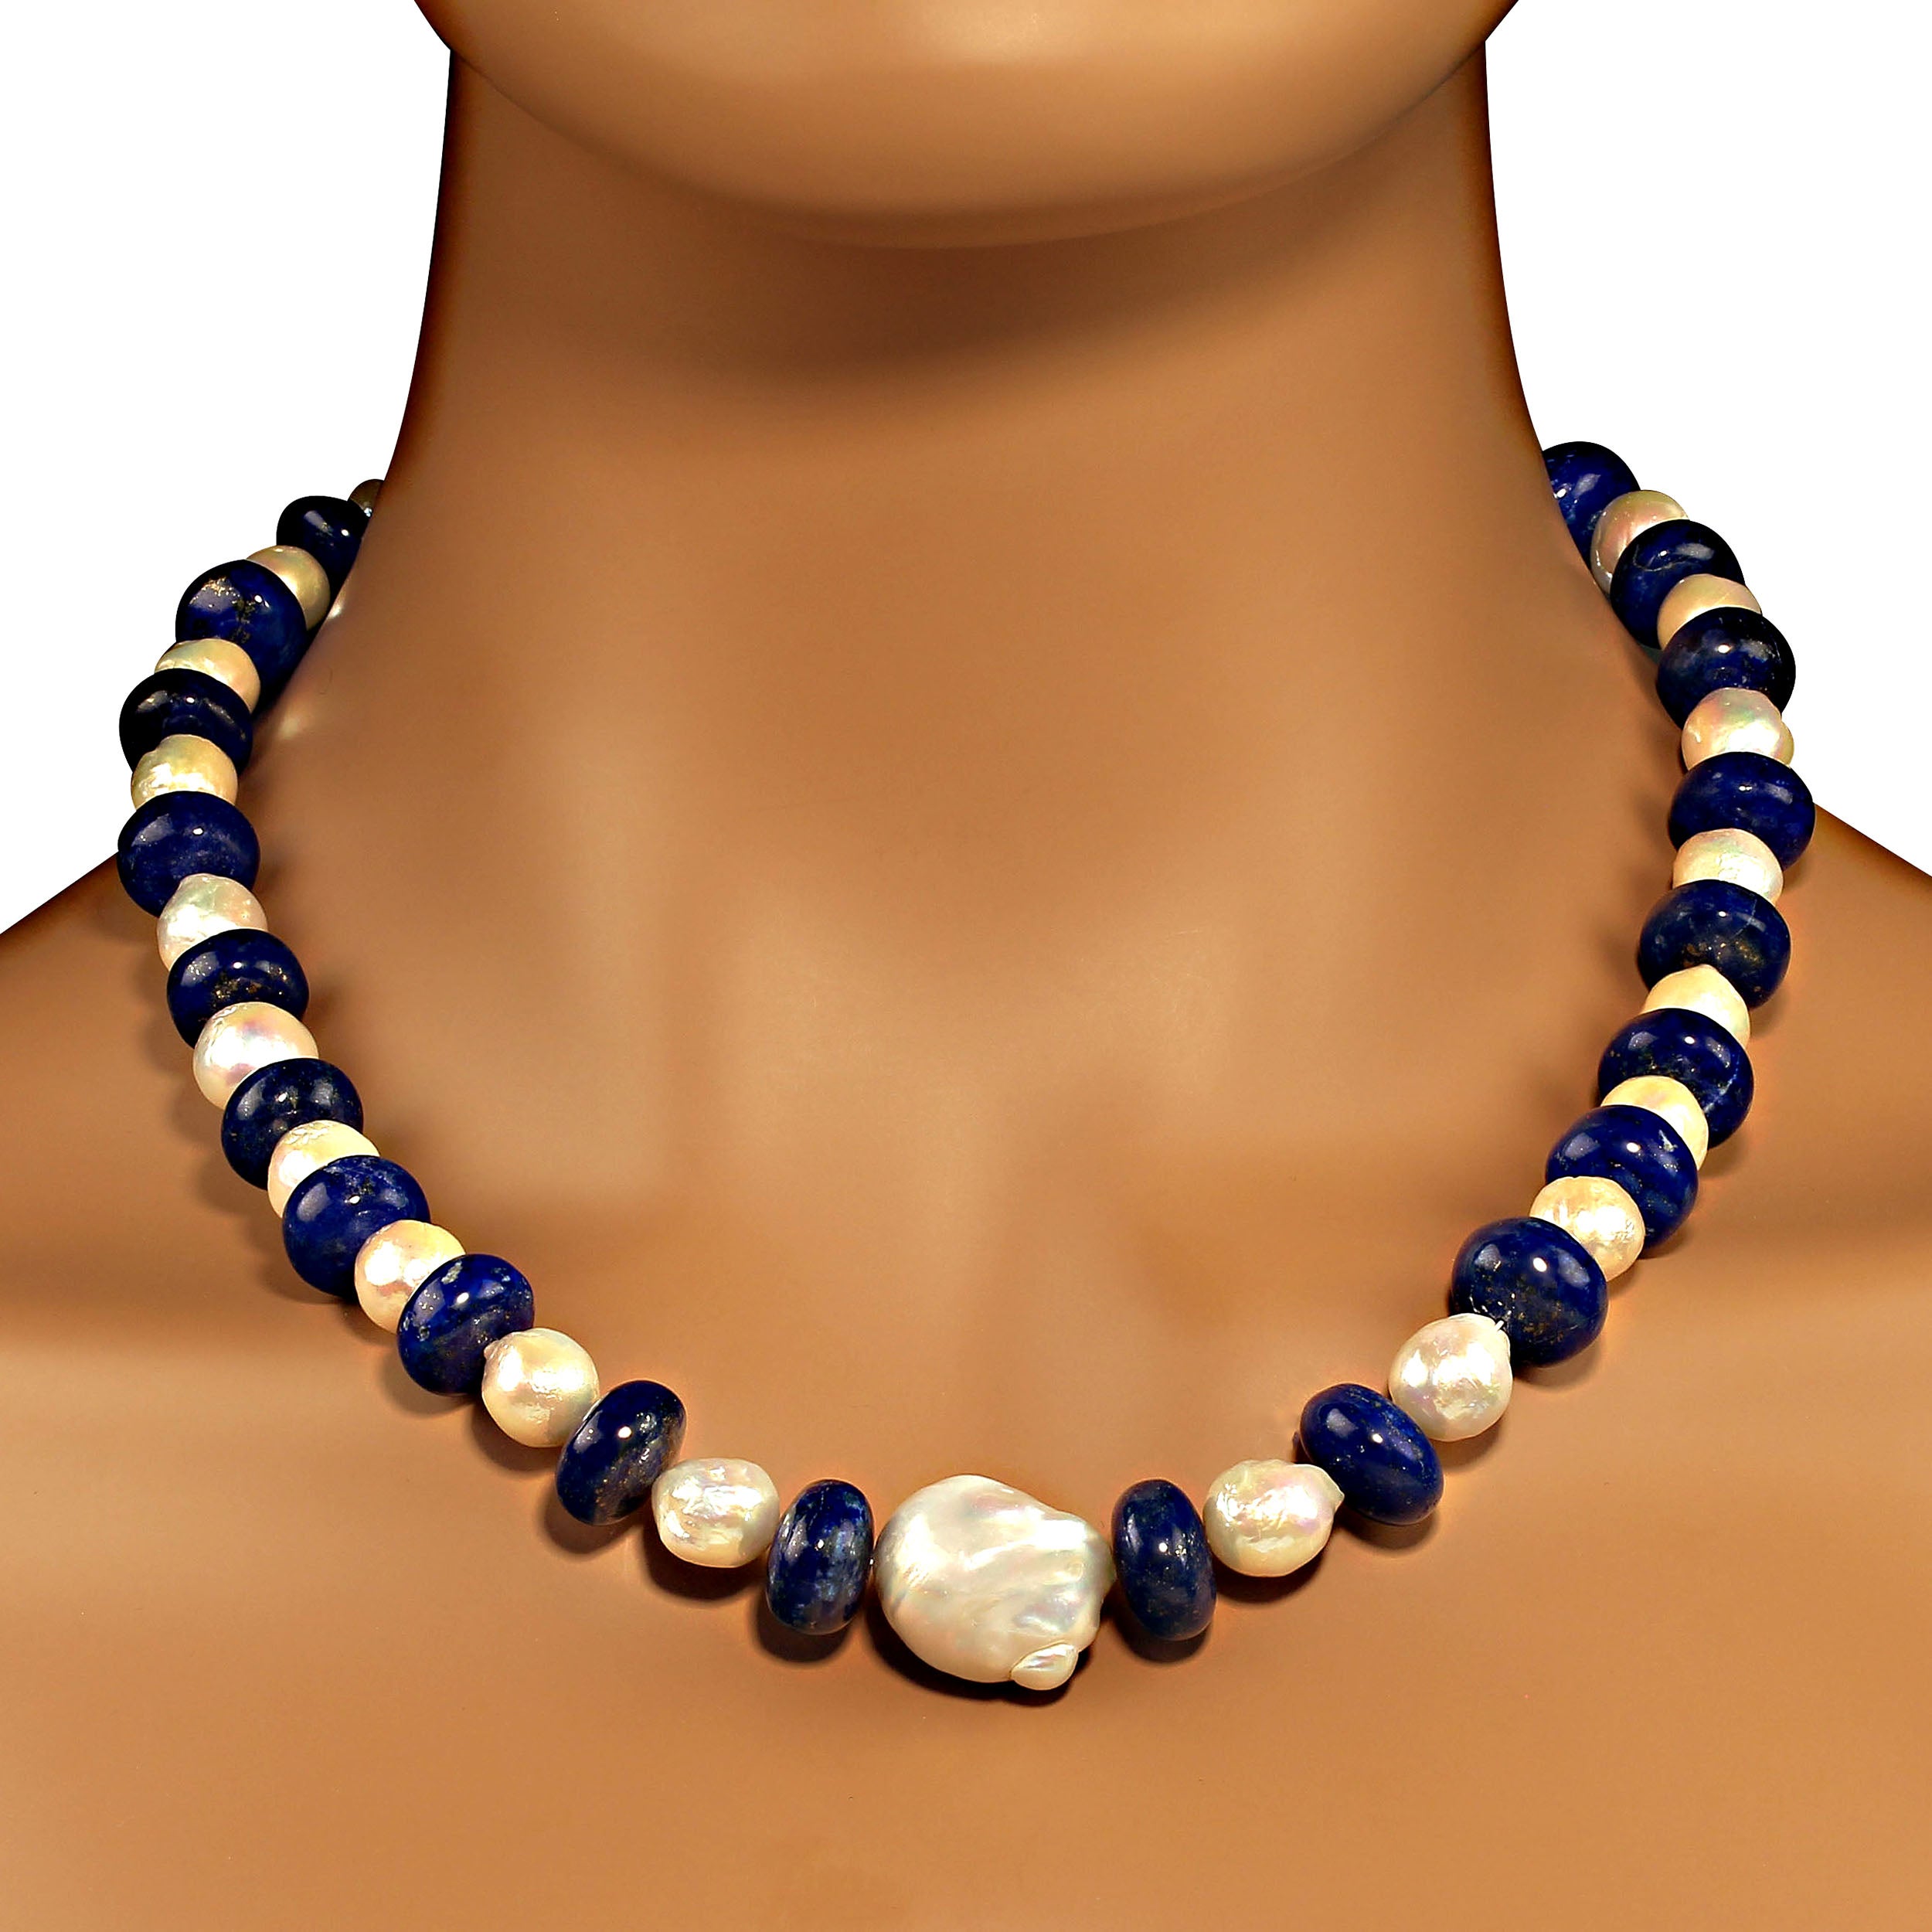 AJD Elegant White Pearl and Blue Lapis Lazuli 20 Inch Necklace